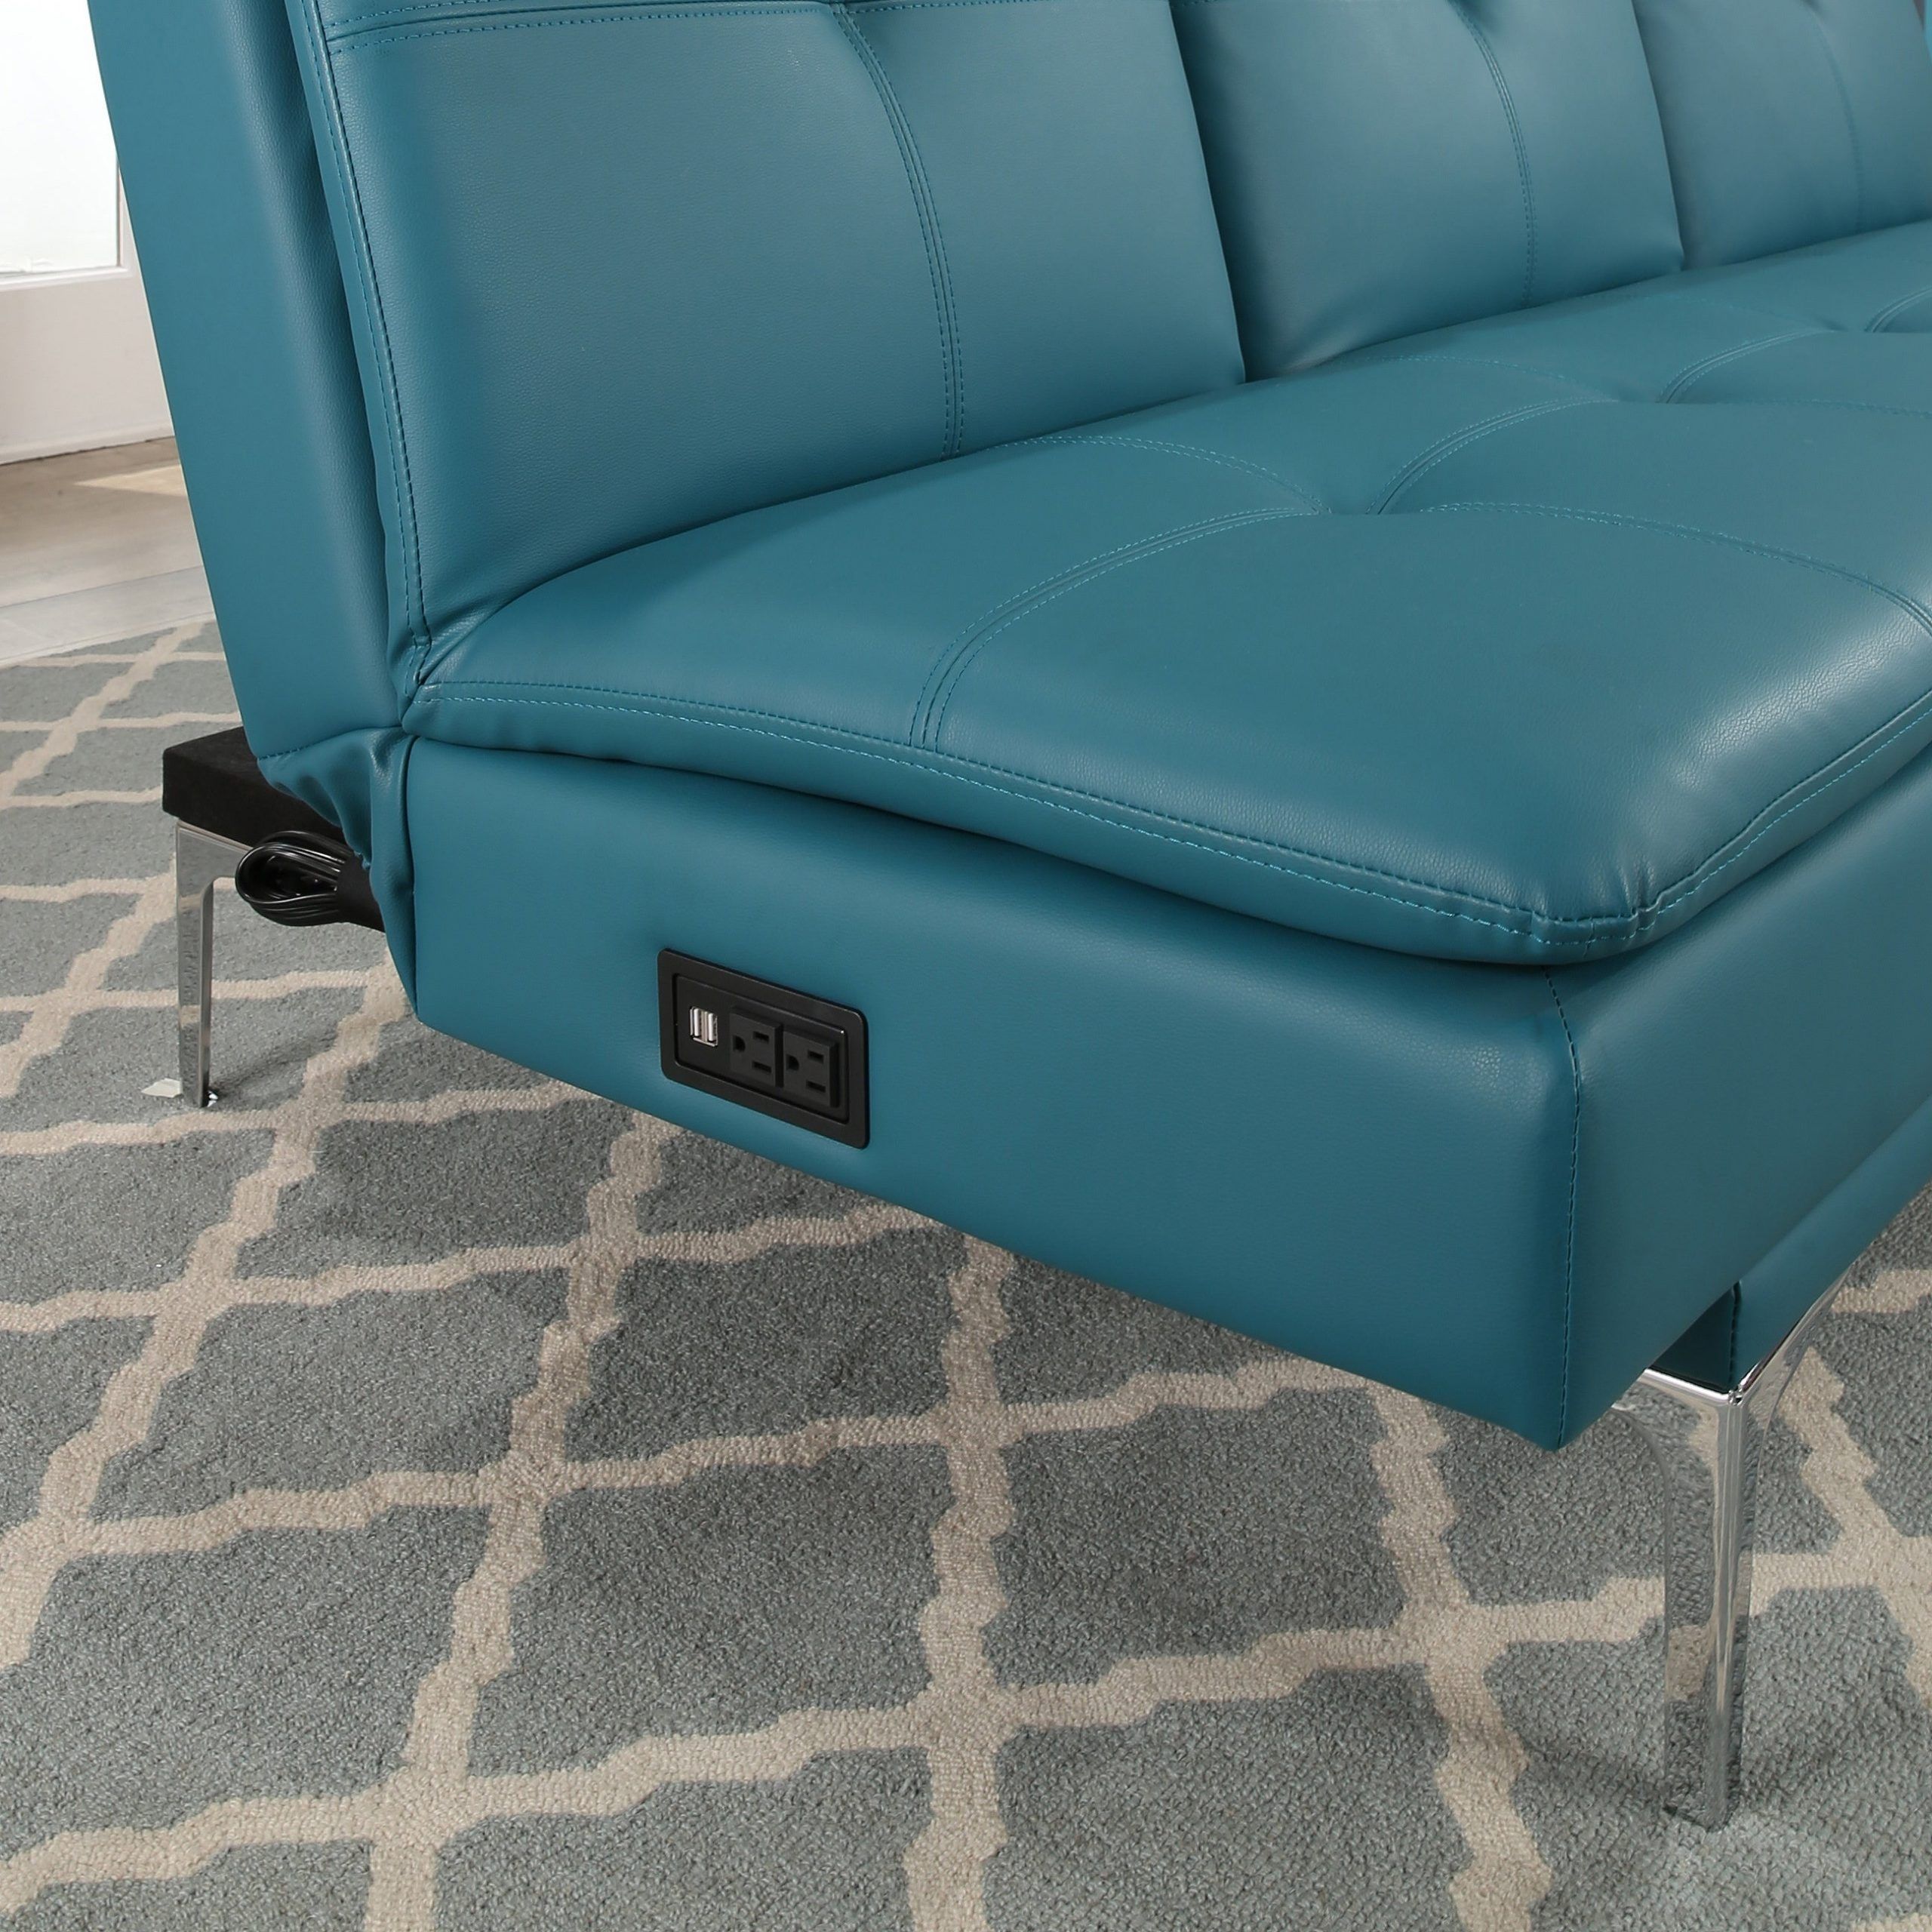 Espresso Faux Leather Ac And Usb Ottomans Throughout Widely Used Abbyson Kilby Turquoise Bonded Leather Sofa Bed With Console And Usb (View 4 of 10)